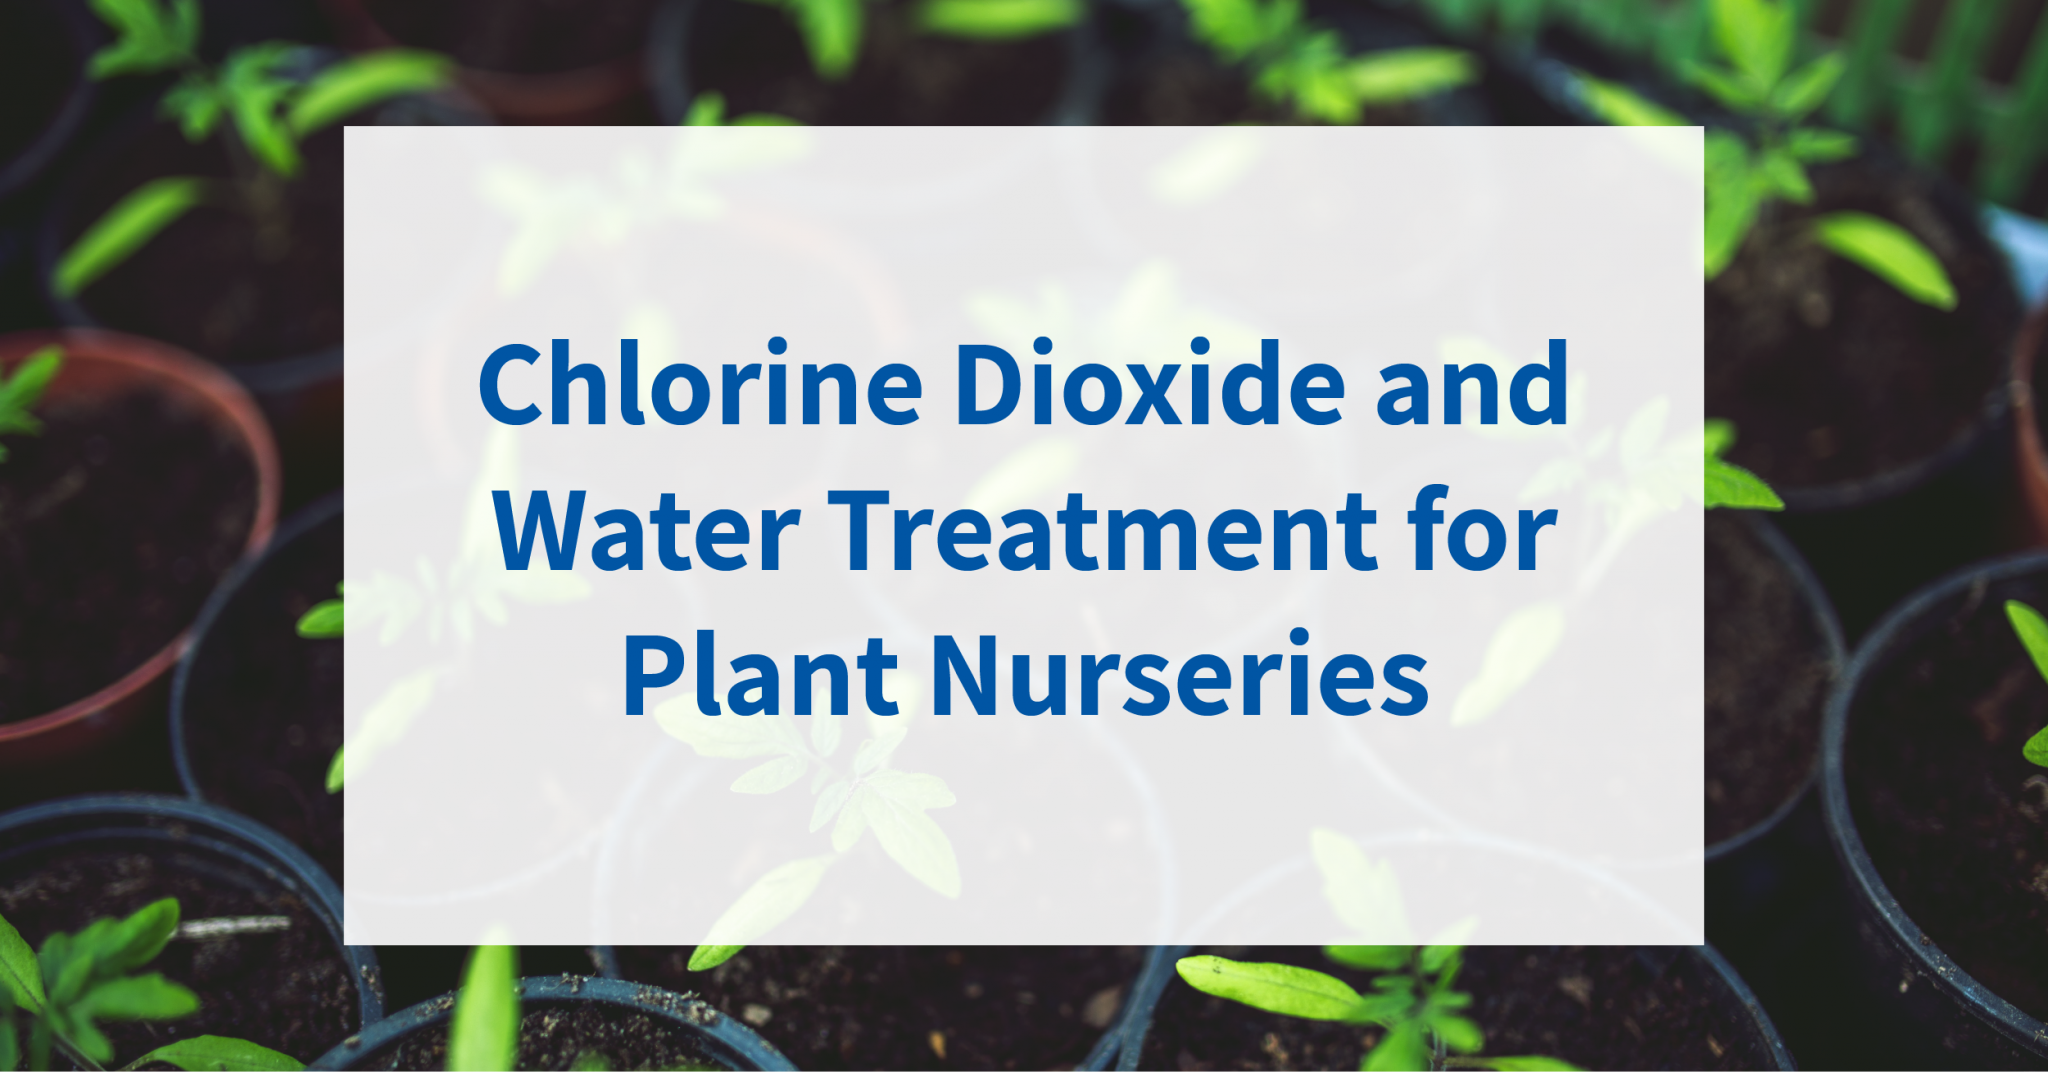 Chlorine Dioxide and water treatment for plant nurseries